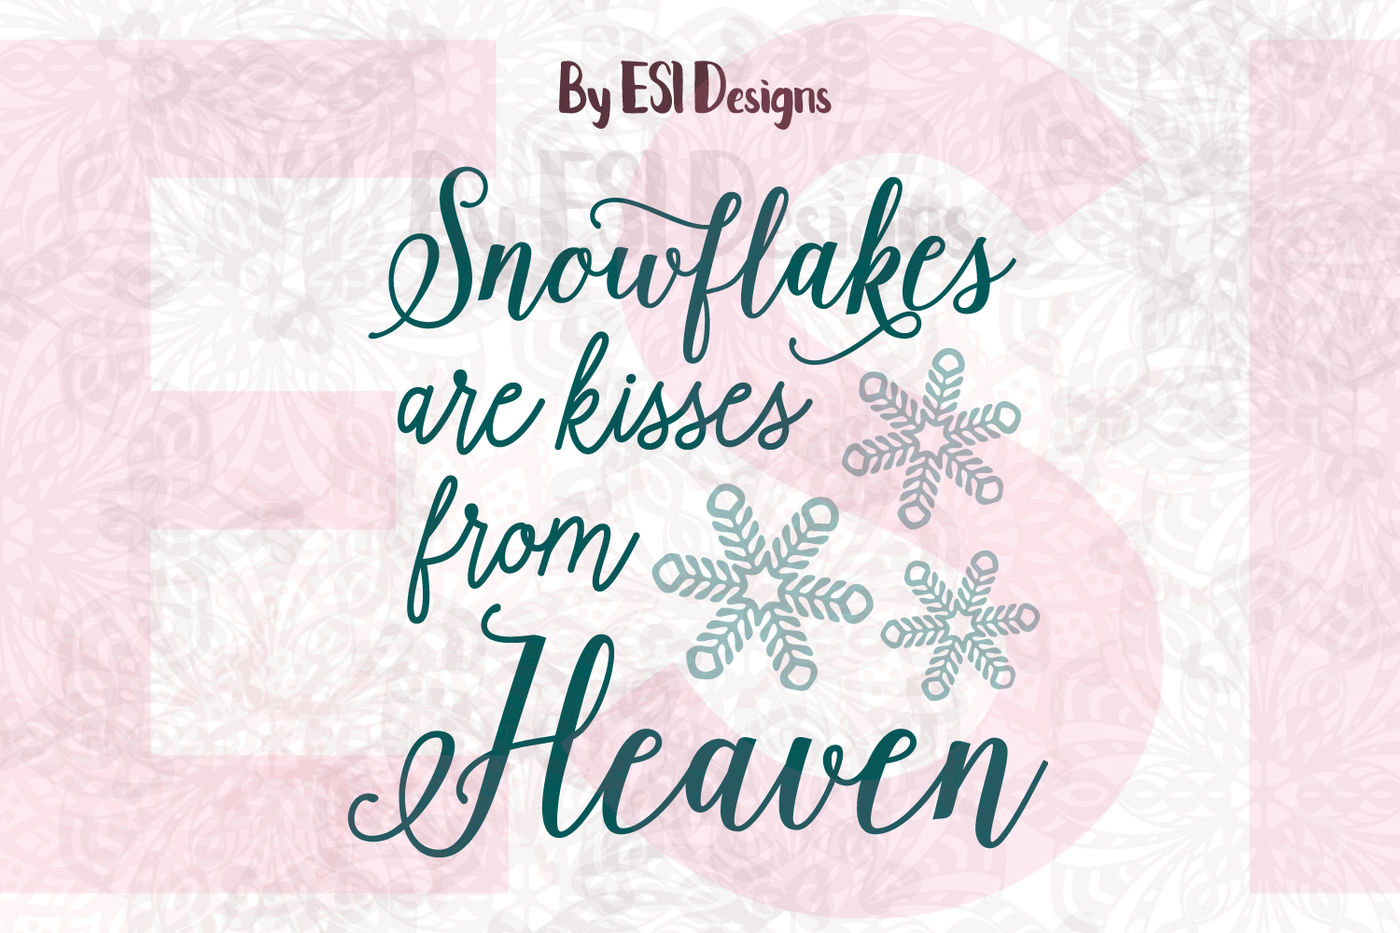 Snowflakes Are Kisses From Heaven Christmas Quote Design By Esi Designs Thehungryjpeg Com